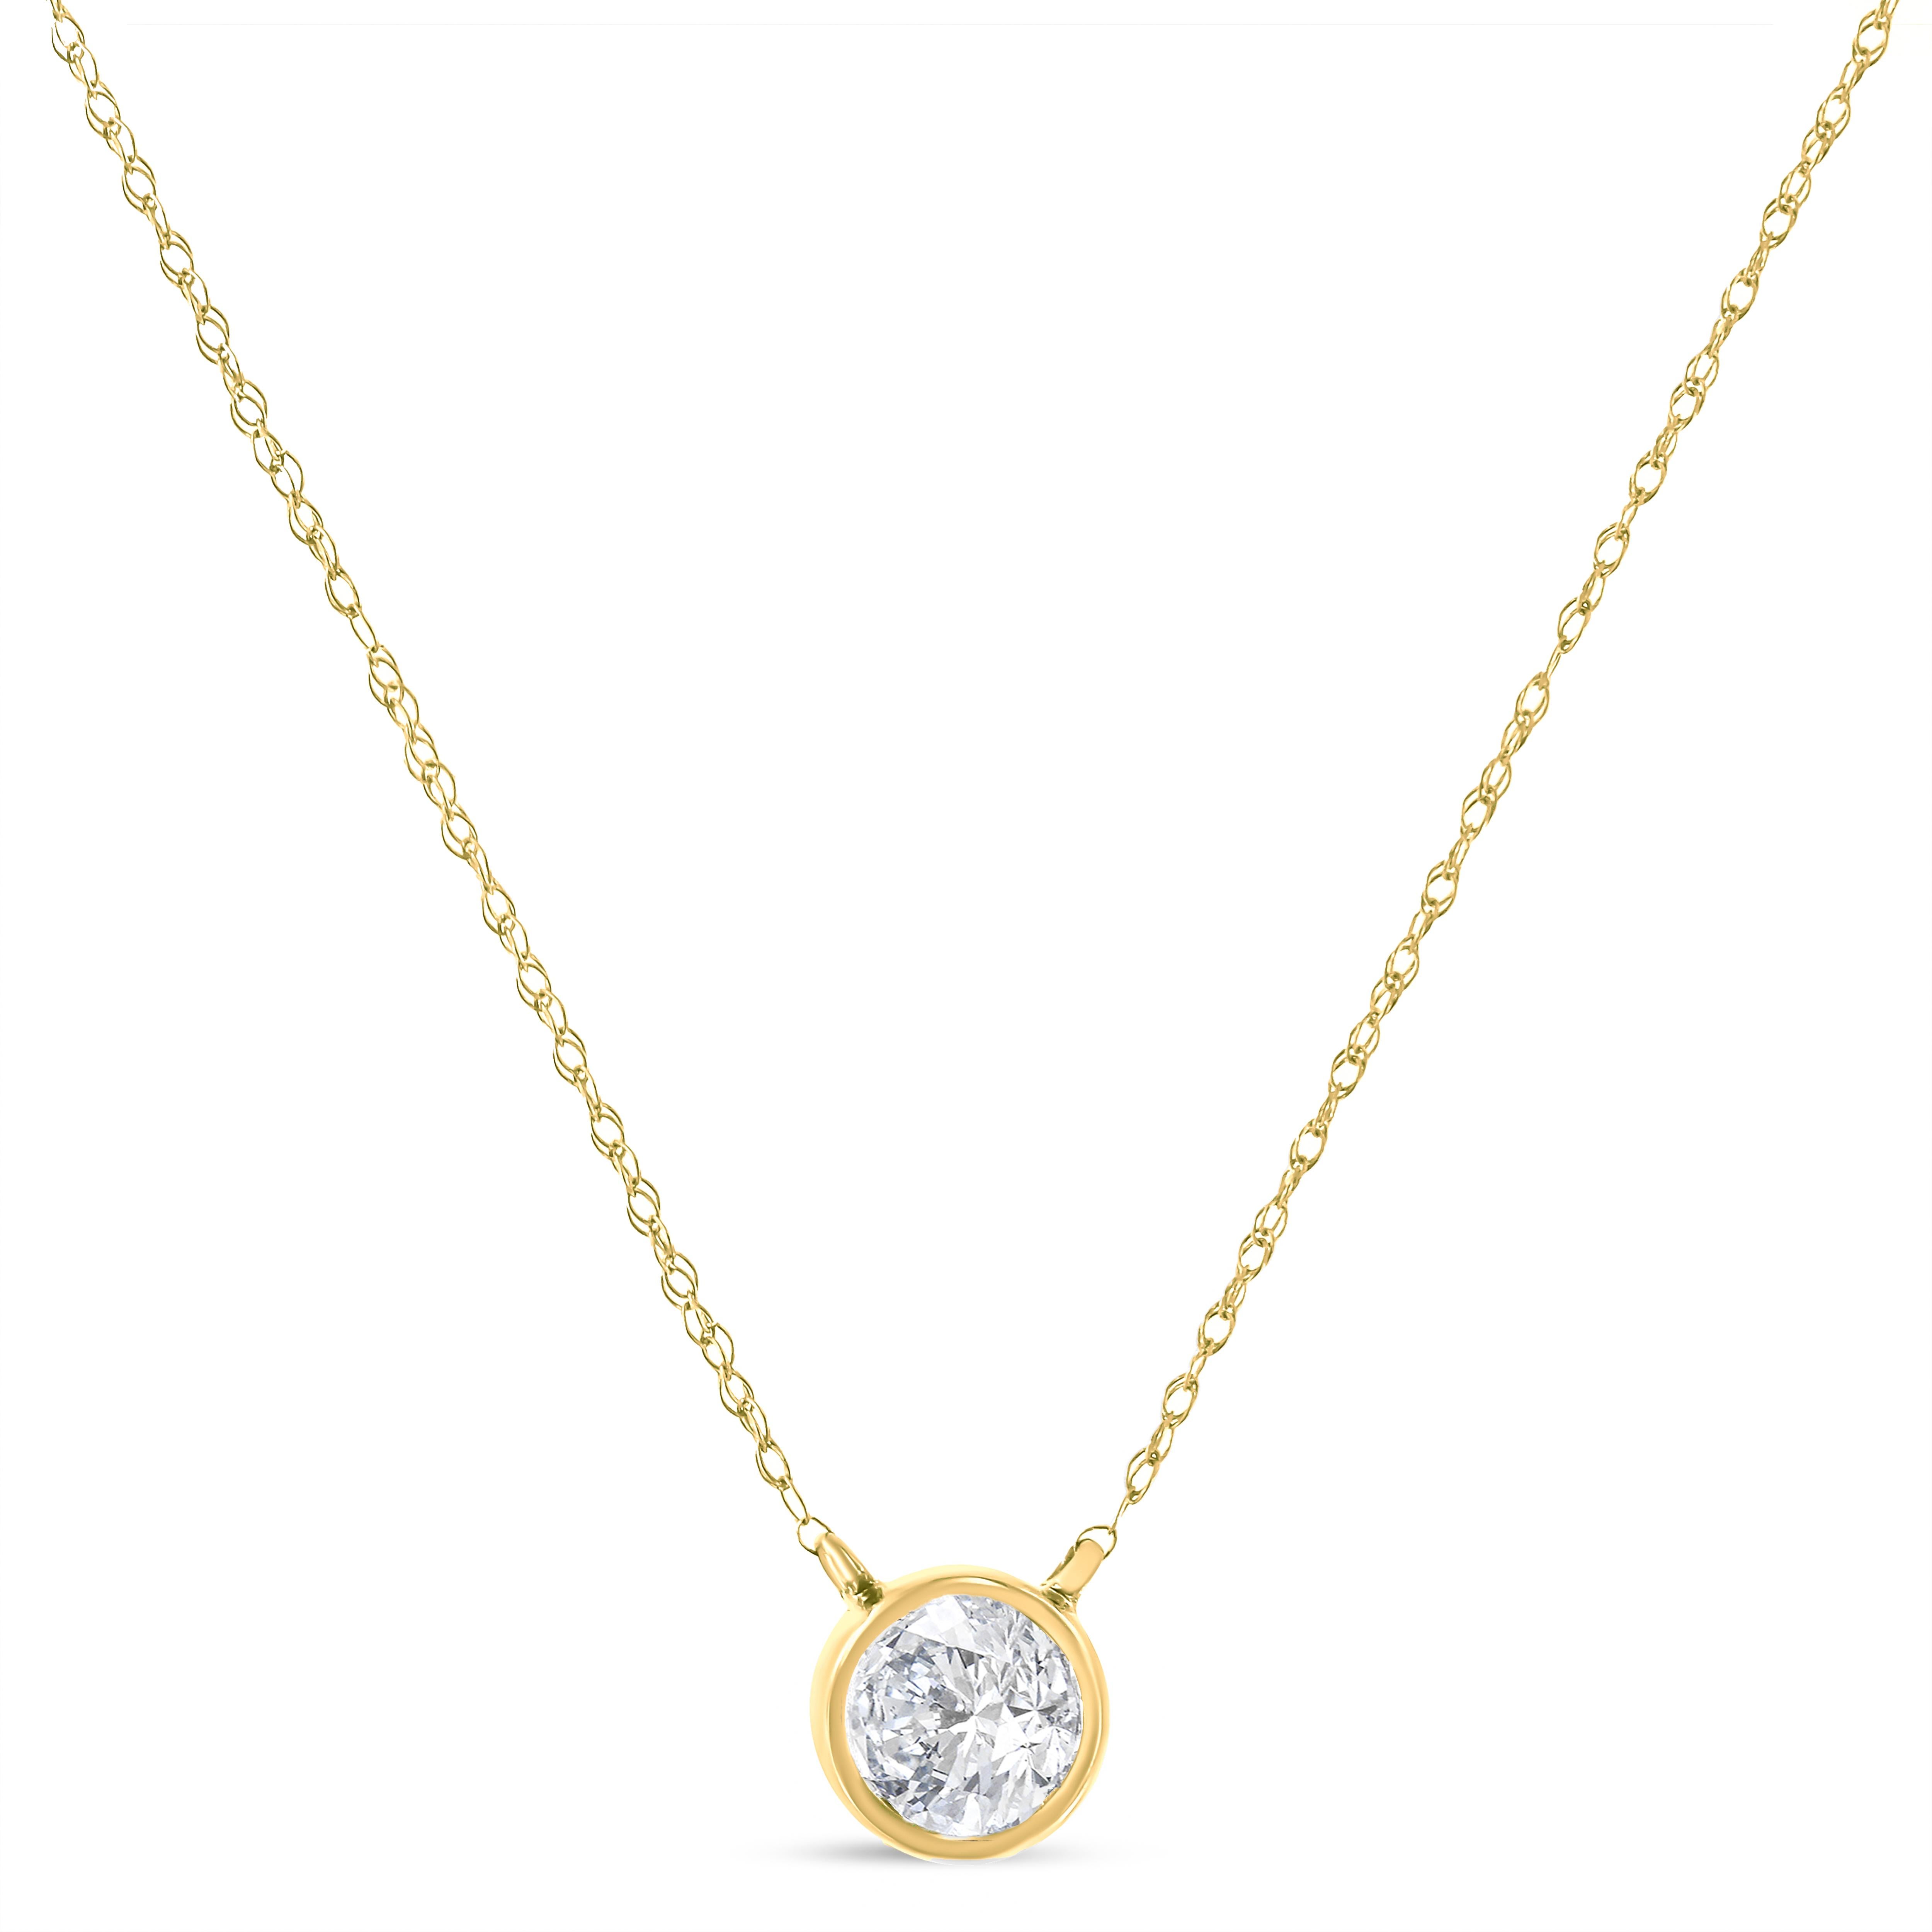 Some things shouldn't be reinvented, which is why we created the Solitaire Diamond Necklace. This is the perfect way to highlight every big occasion, transition, and personal achievement in your life. This solitaire diamond necklace features a